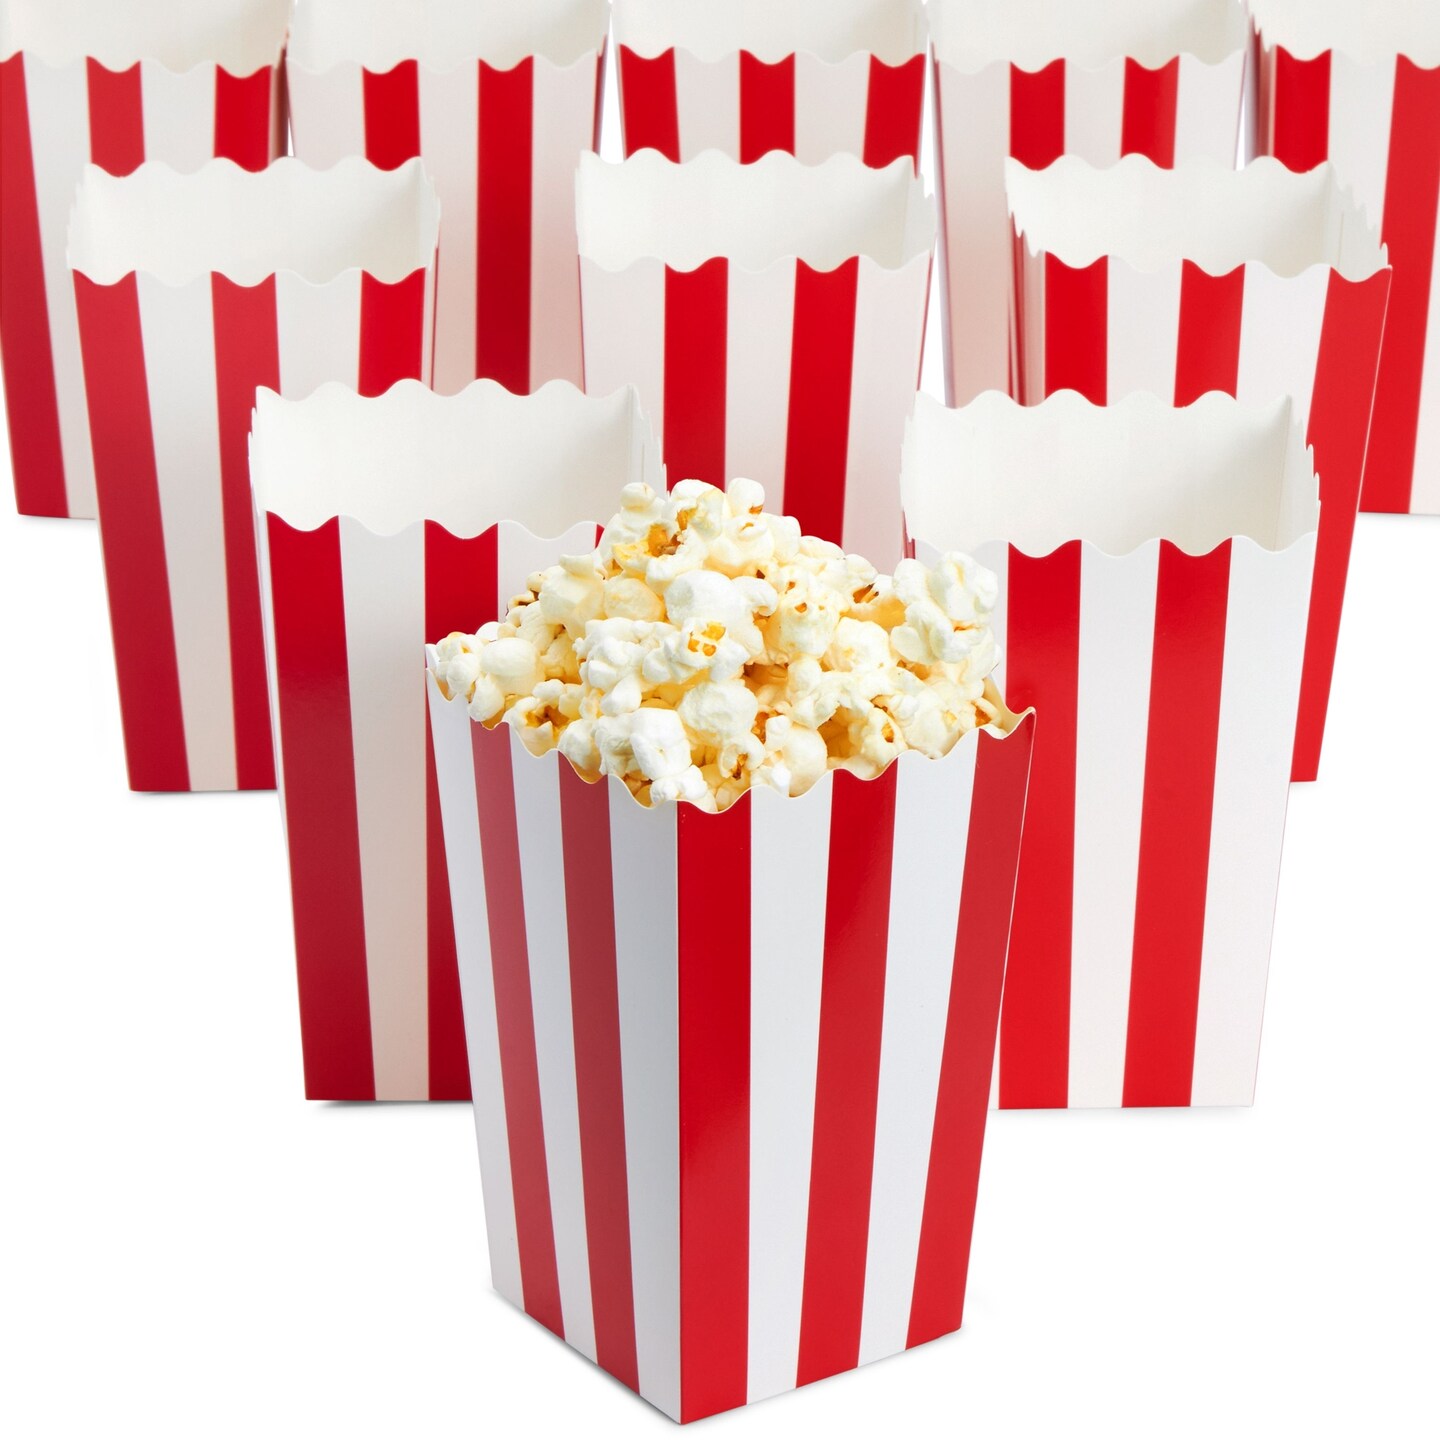 Set of 100 Mini Popcorn Favor Boxes - 3x5 Snack Containers for